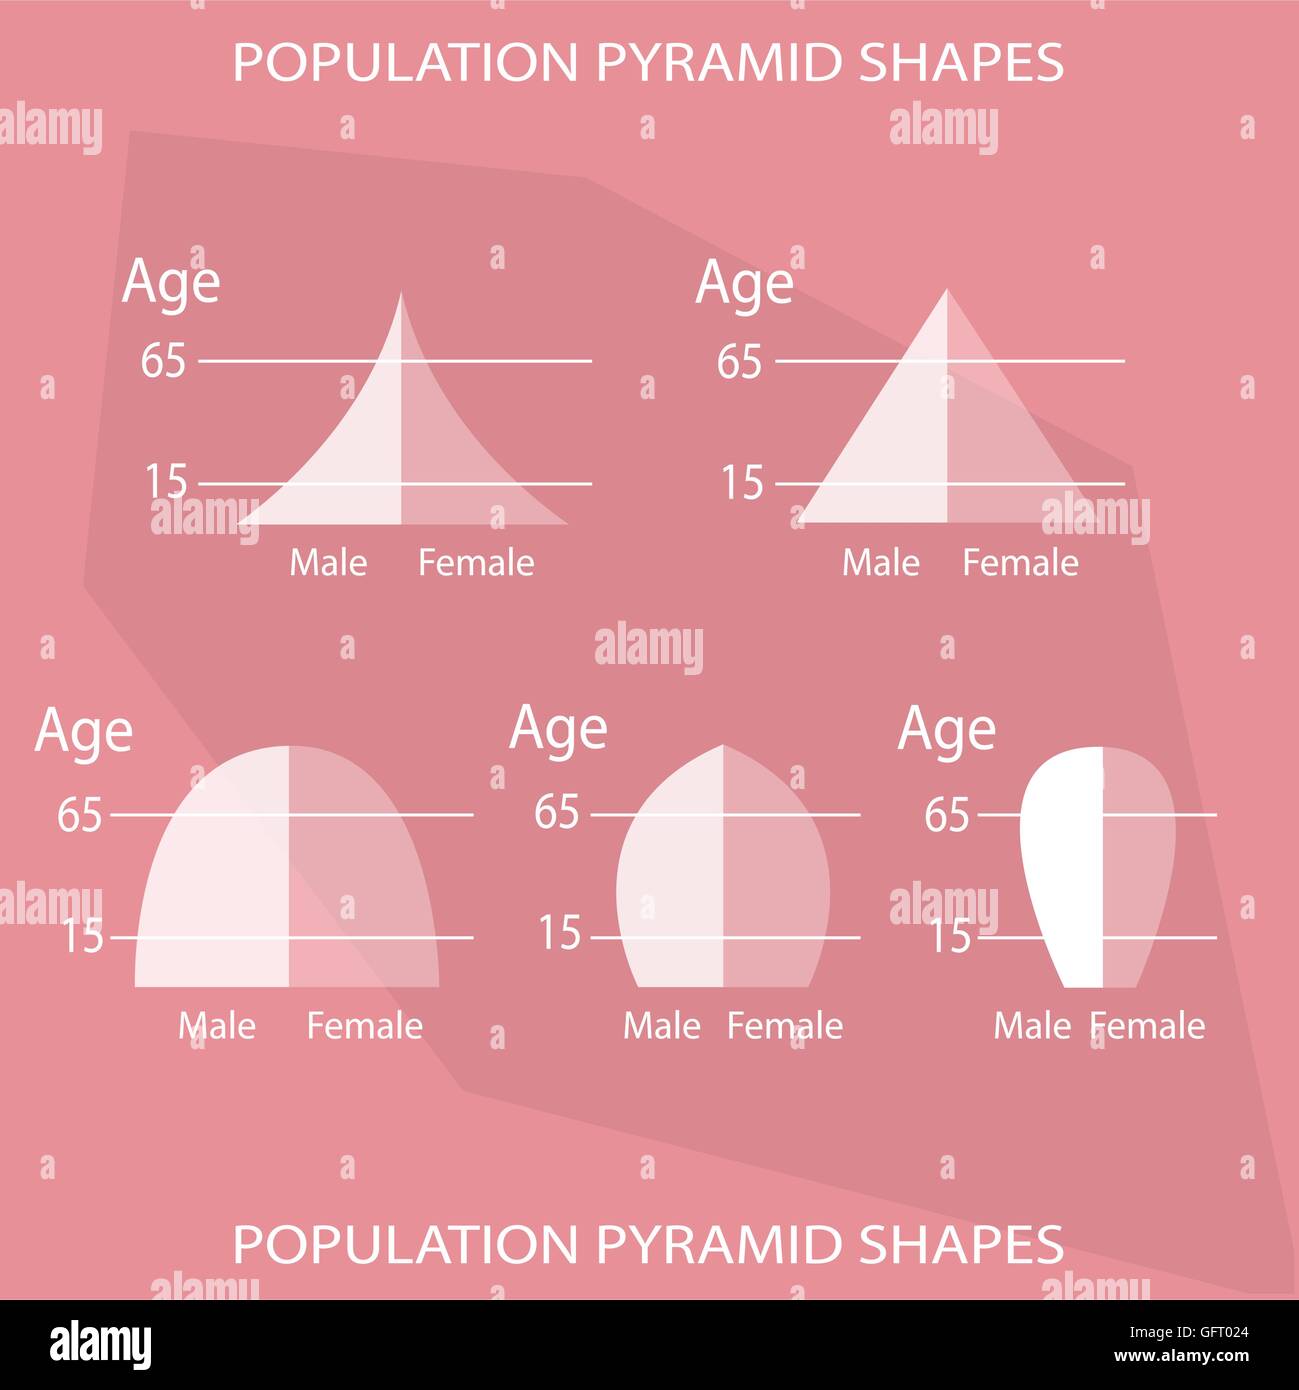 Different Types Of Population Pyramids